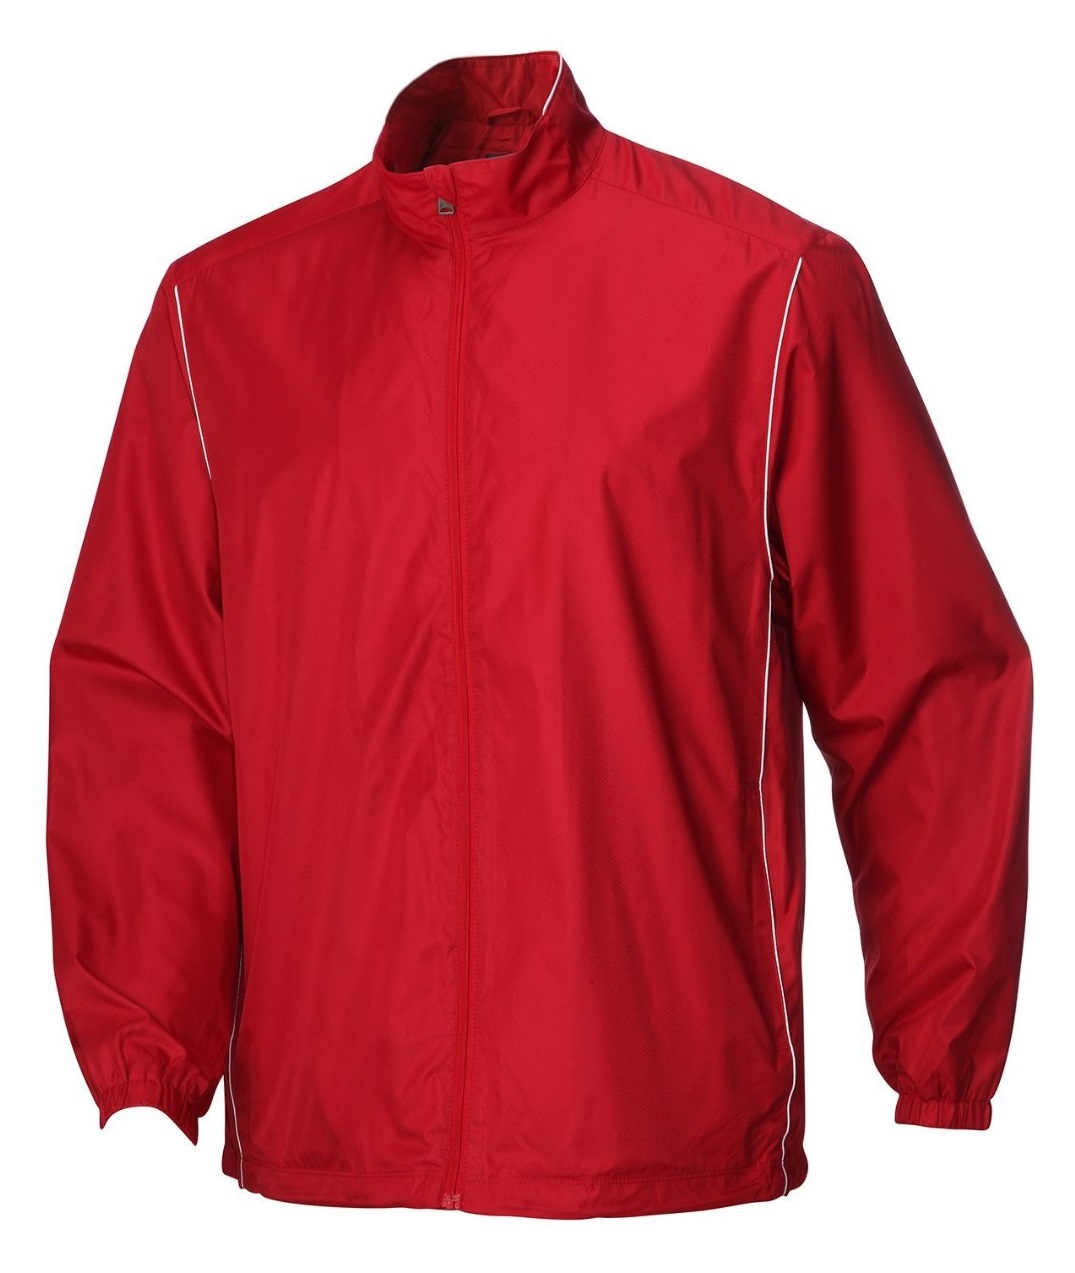 Greg Norman Water Resistant Performance Golf Jackets